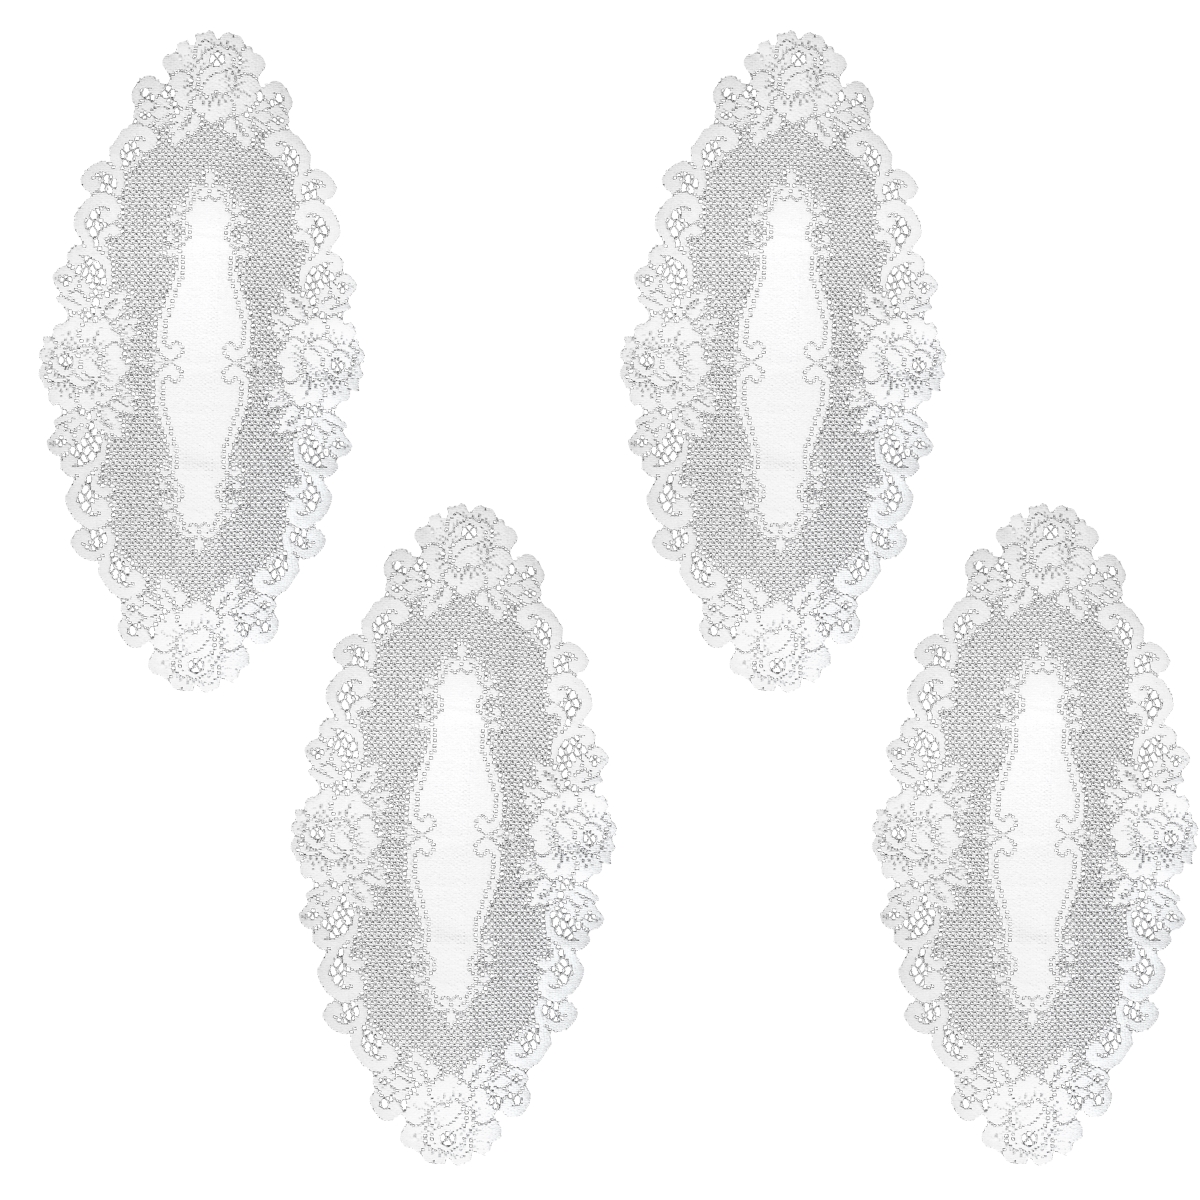 Picture of Heritage Lace VT-1224W-S 12 x 24 in. Vintage Rose Doilies&#44; White - Set of 4